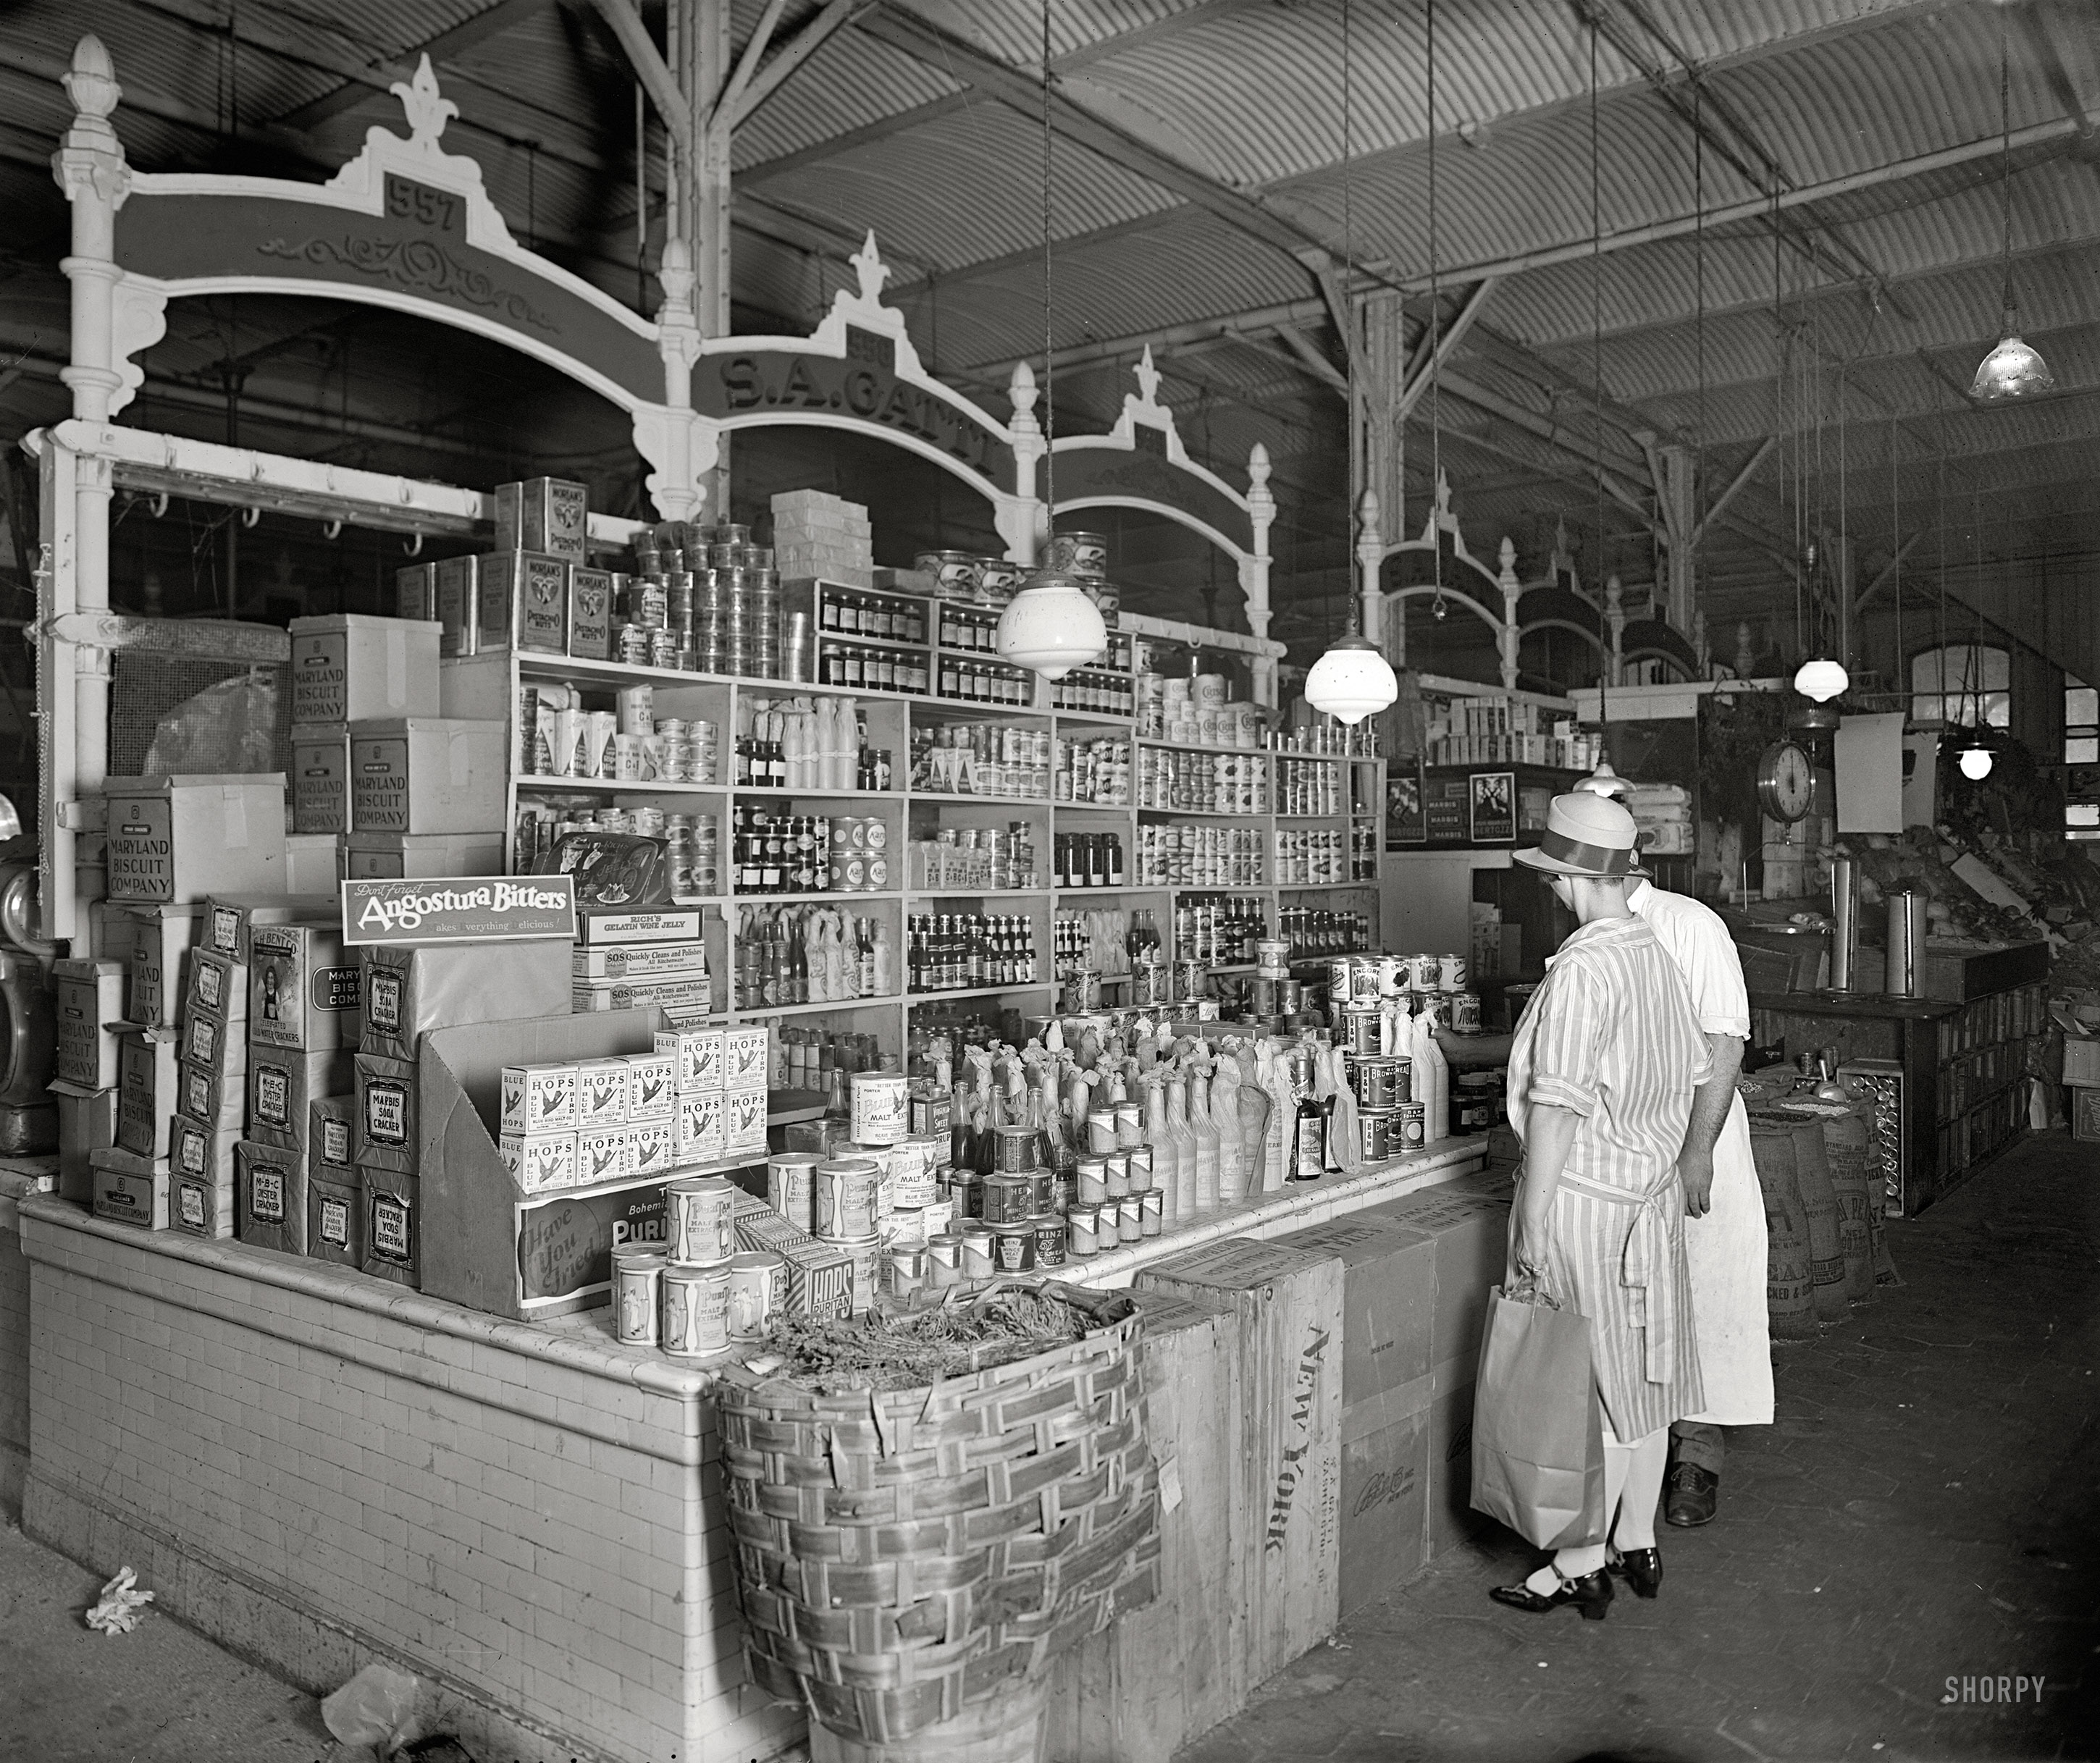 Washington, D.C., circa 1926. "Thomas R. Shipp Co. -- S.A. Gatti stand, Center Market." Offering malt extract, wine jelly and hops, three items for your Prohibition-era shopping list. National Photo glass negative. View full size.